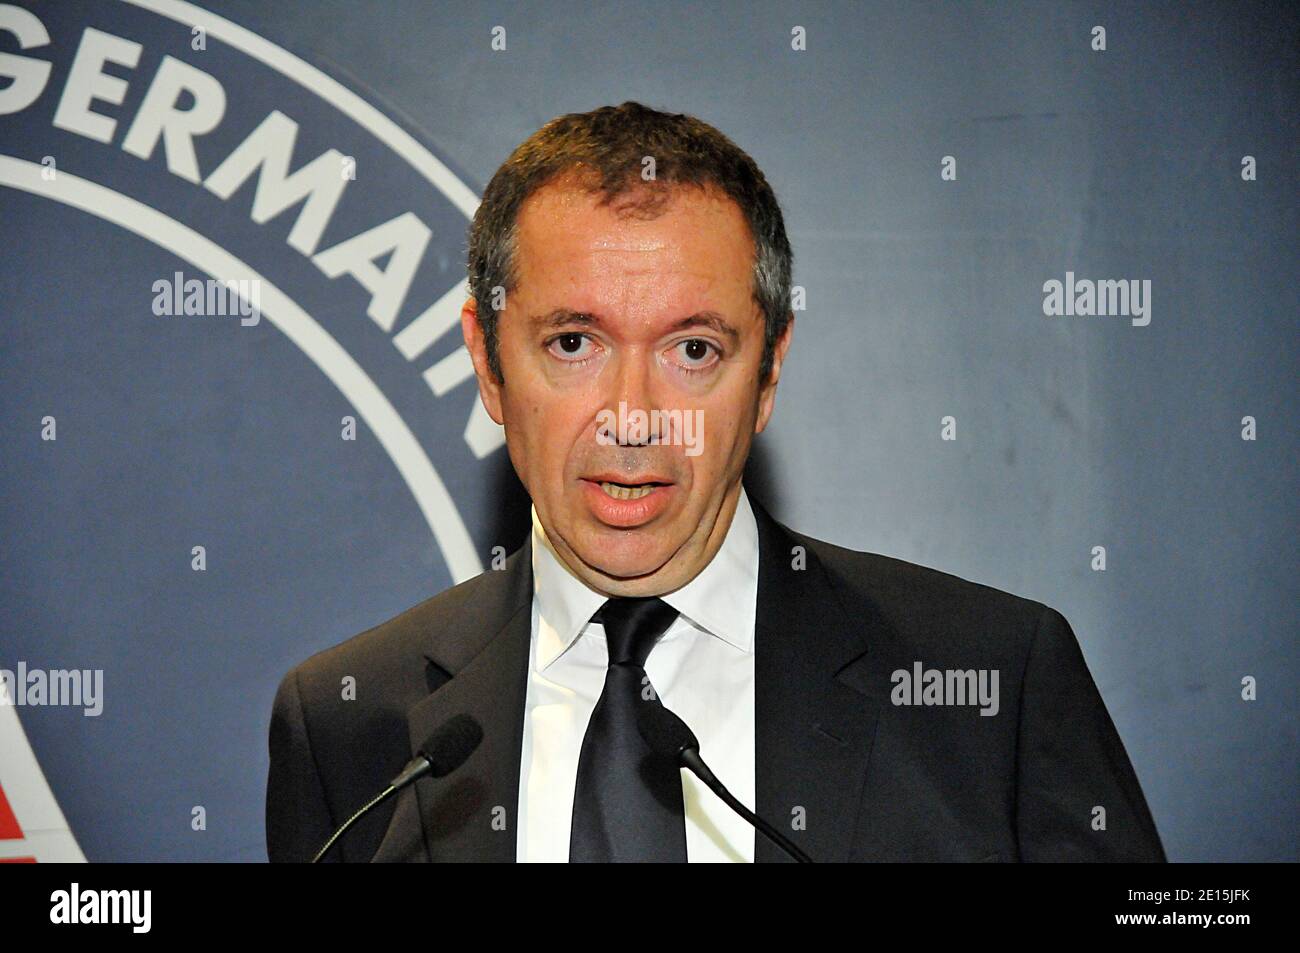 PSG's football team president Robin Leproux inaugurates the Philippe Seguin's stand during the French First League soccer match, Paris Saint-Germain vs Lorient in Paris, France on April 2, 2011. The match ended in a 0-0 draw. Photo by Thierry Plessis/ABACAPRESS.COM Stock Photo